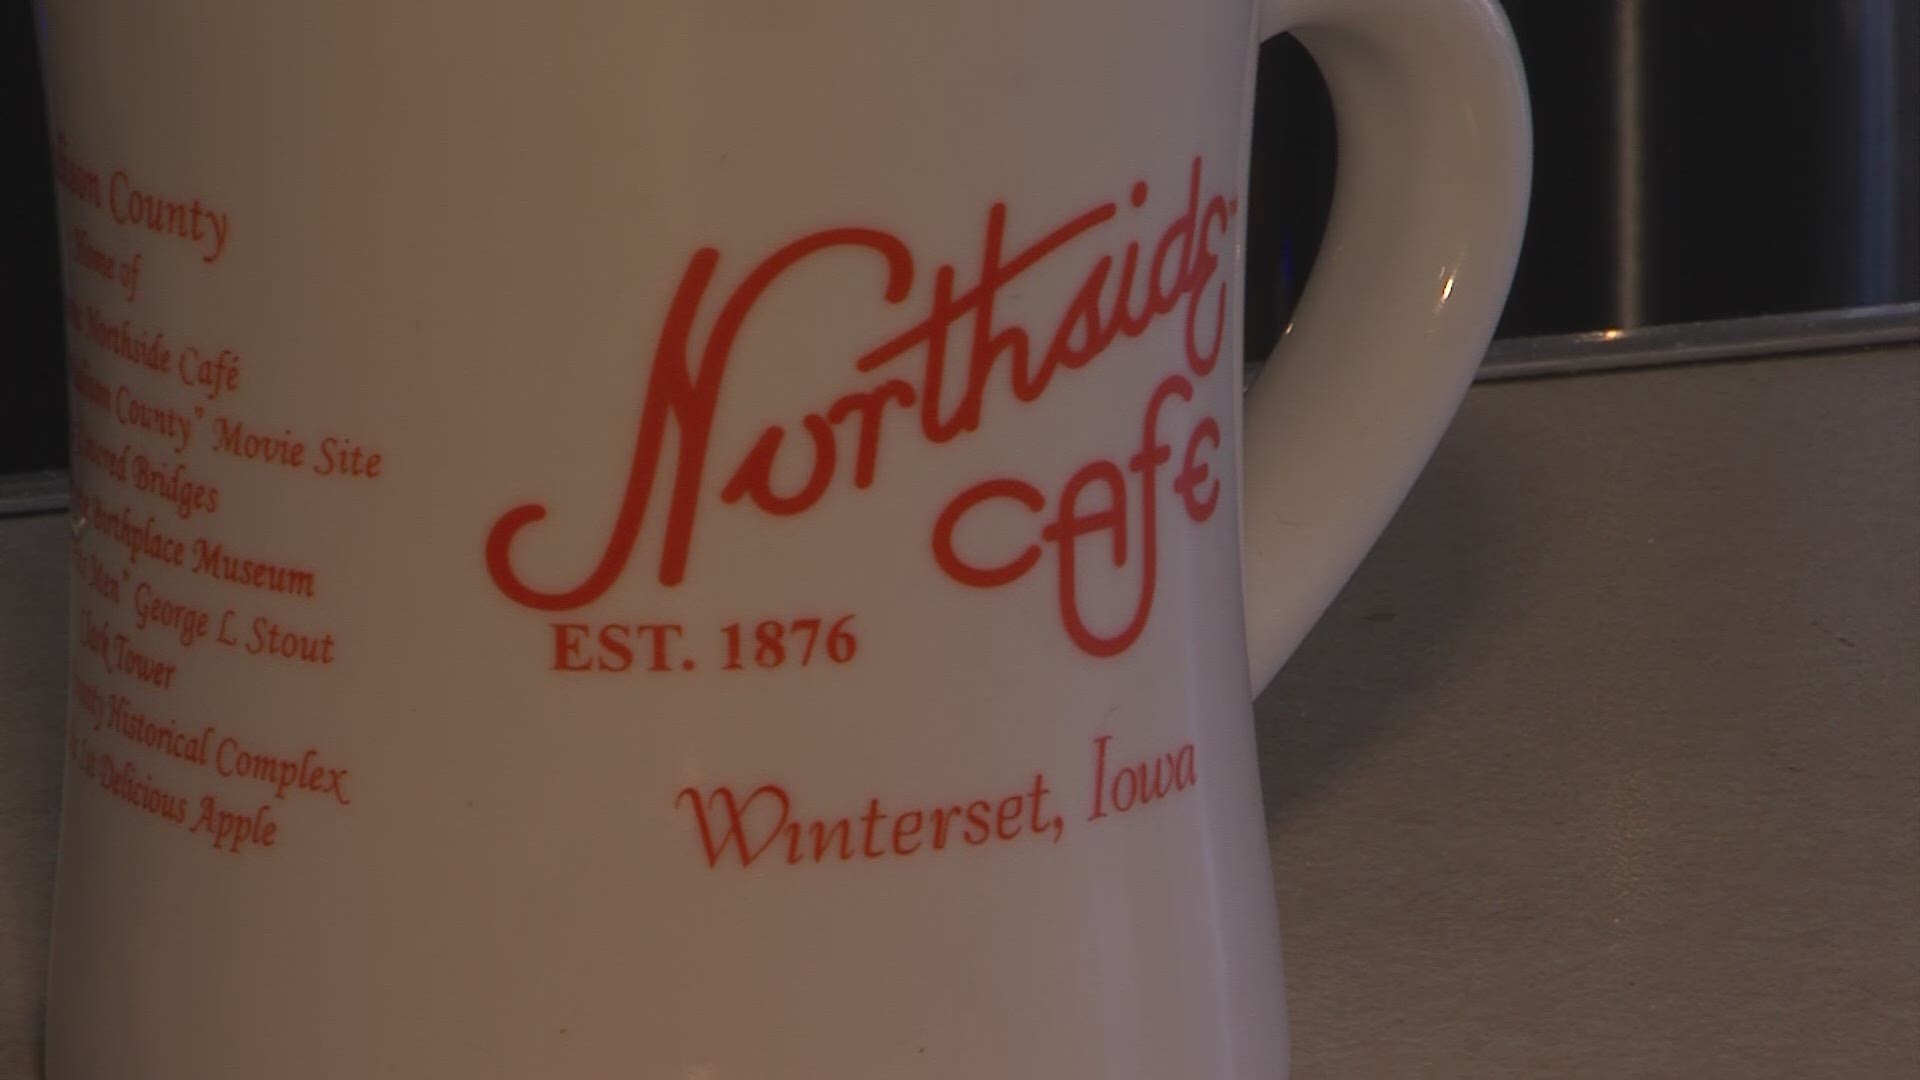 Winterset's Northside Cafe was built in 1876. In 2020, it's doing its part to help the community in a time of need.